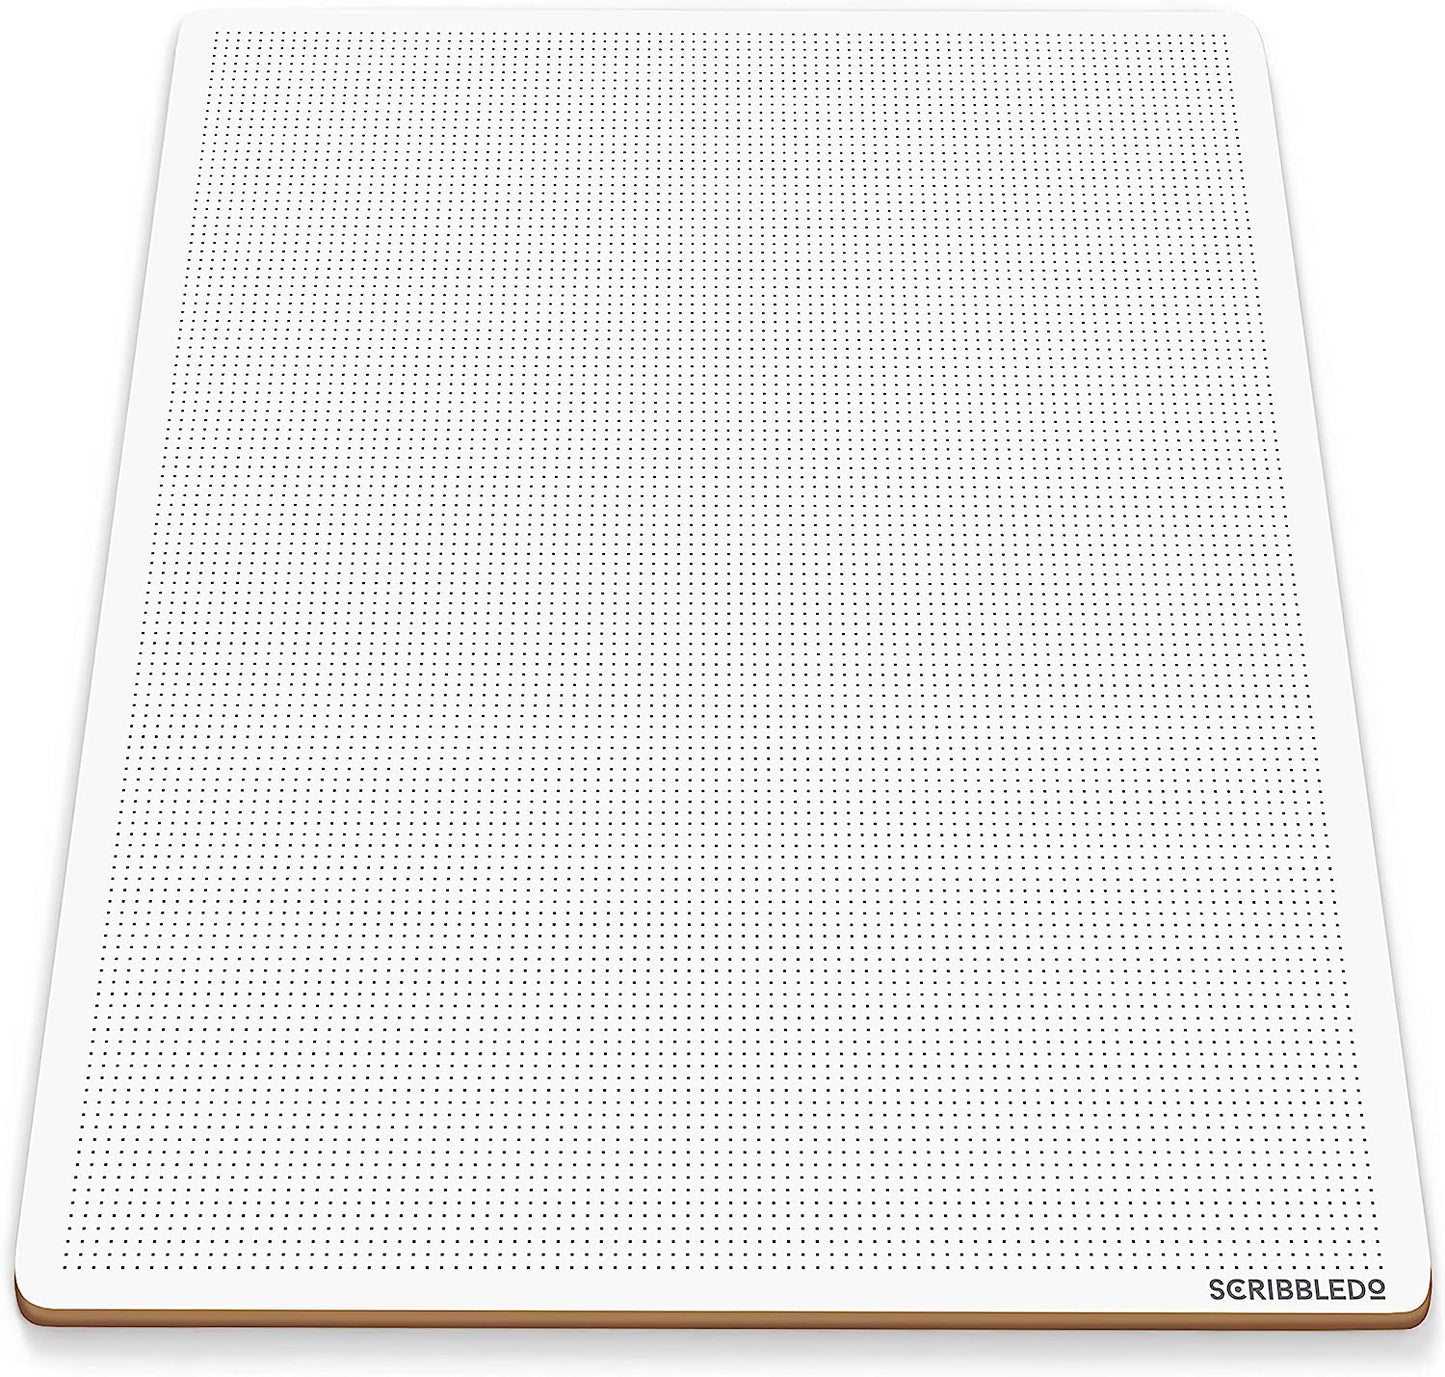 Dotted Double Sided Graph Whiteboard 9"x12"